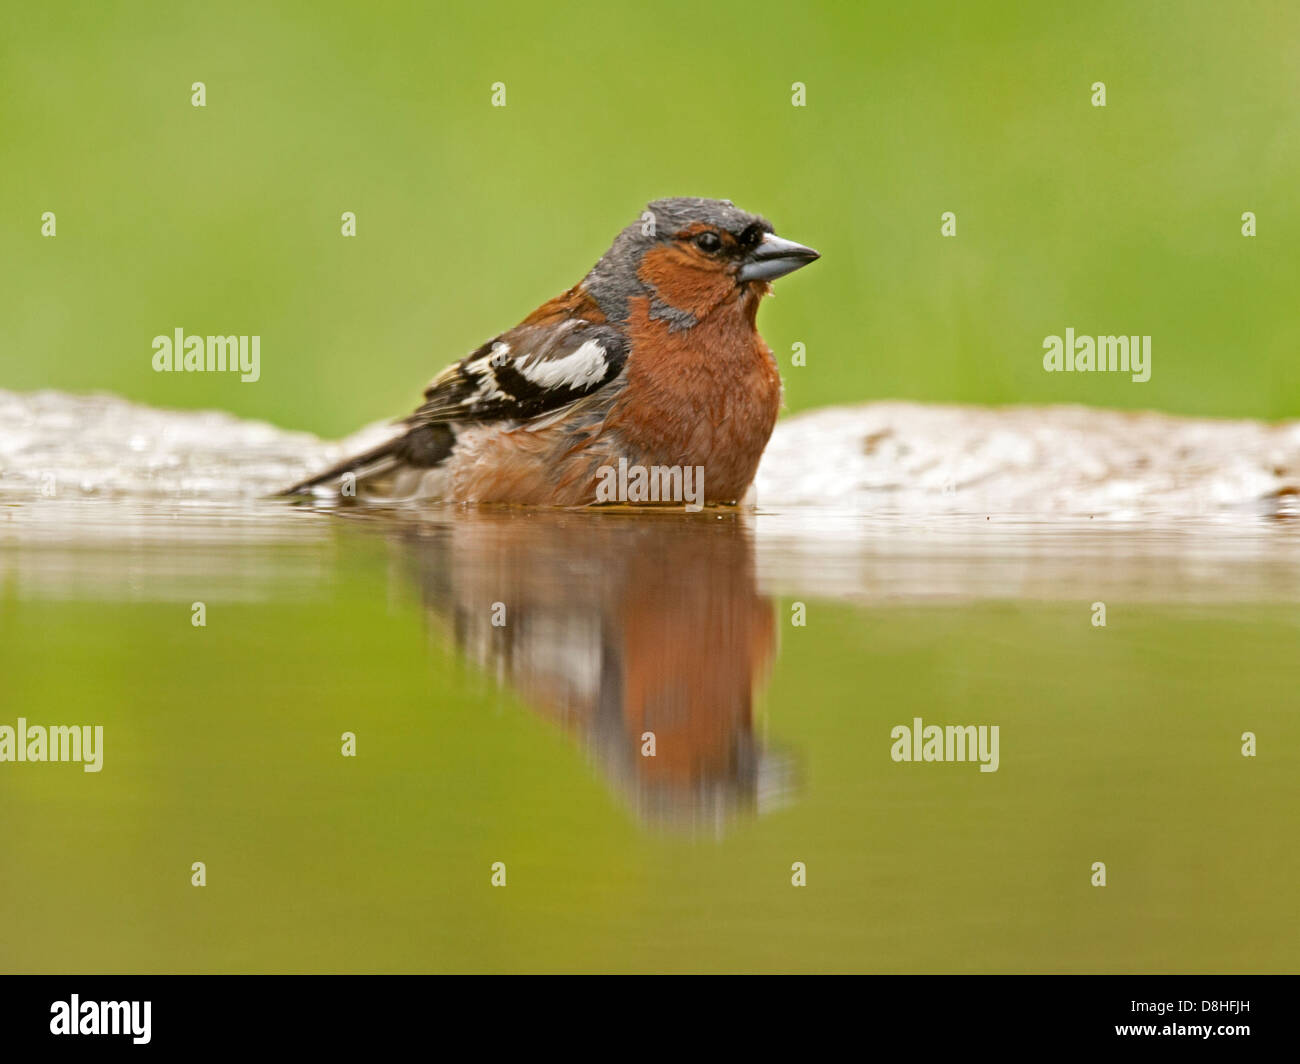 Male chaffinch bathing at edge of pool Stock Photo